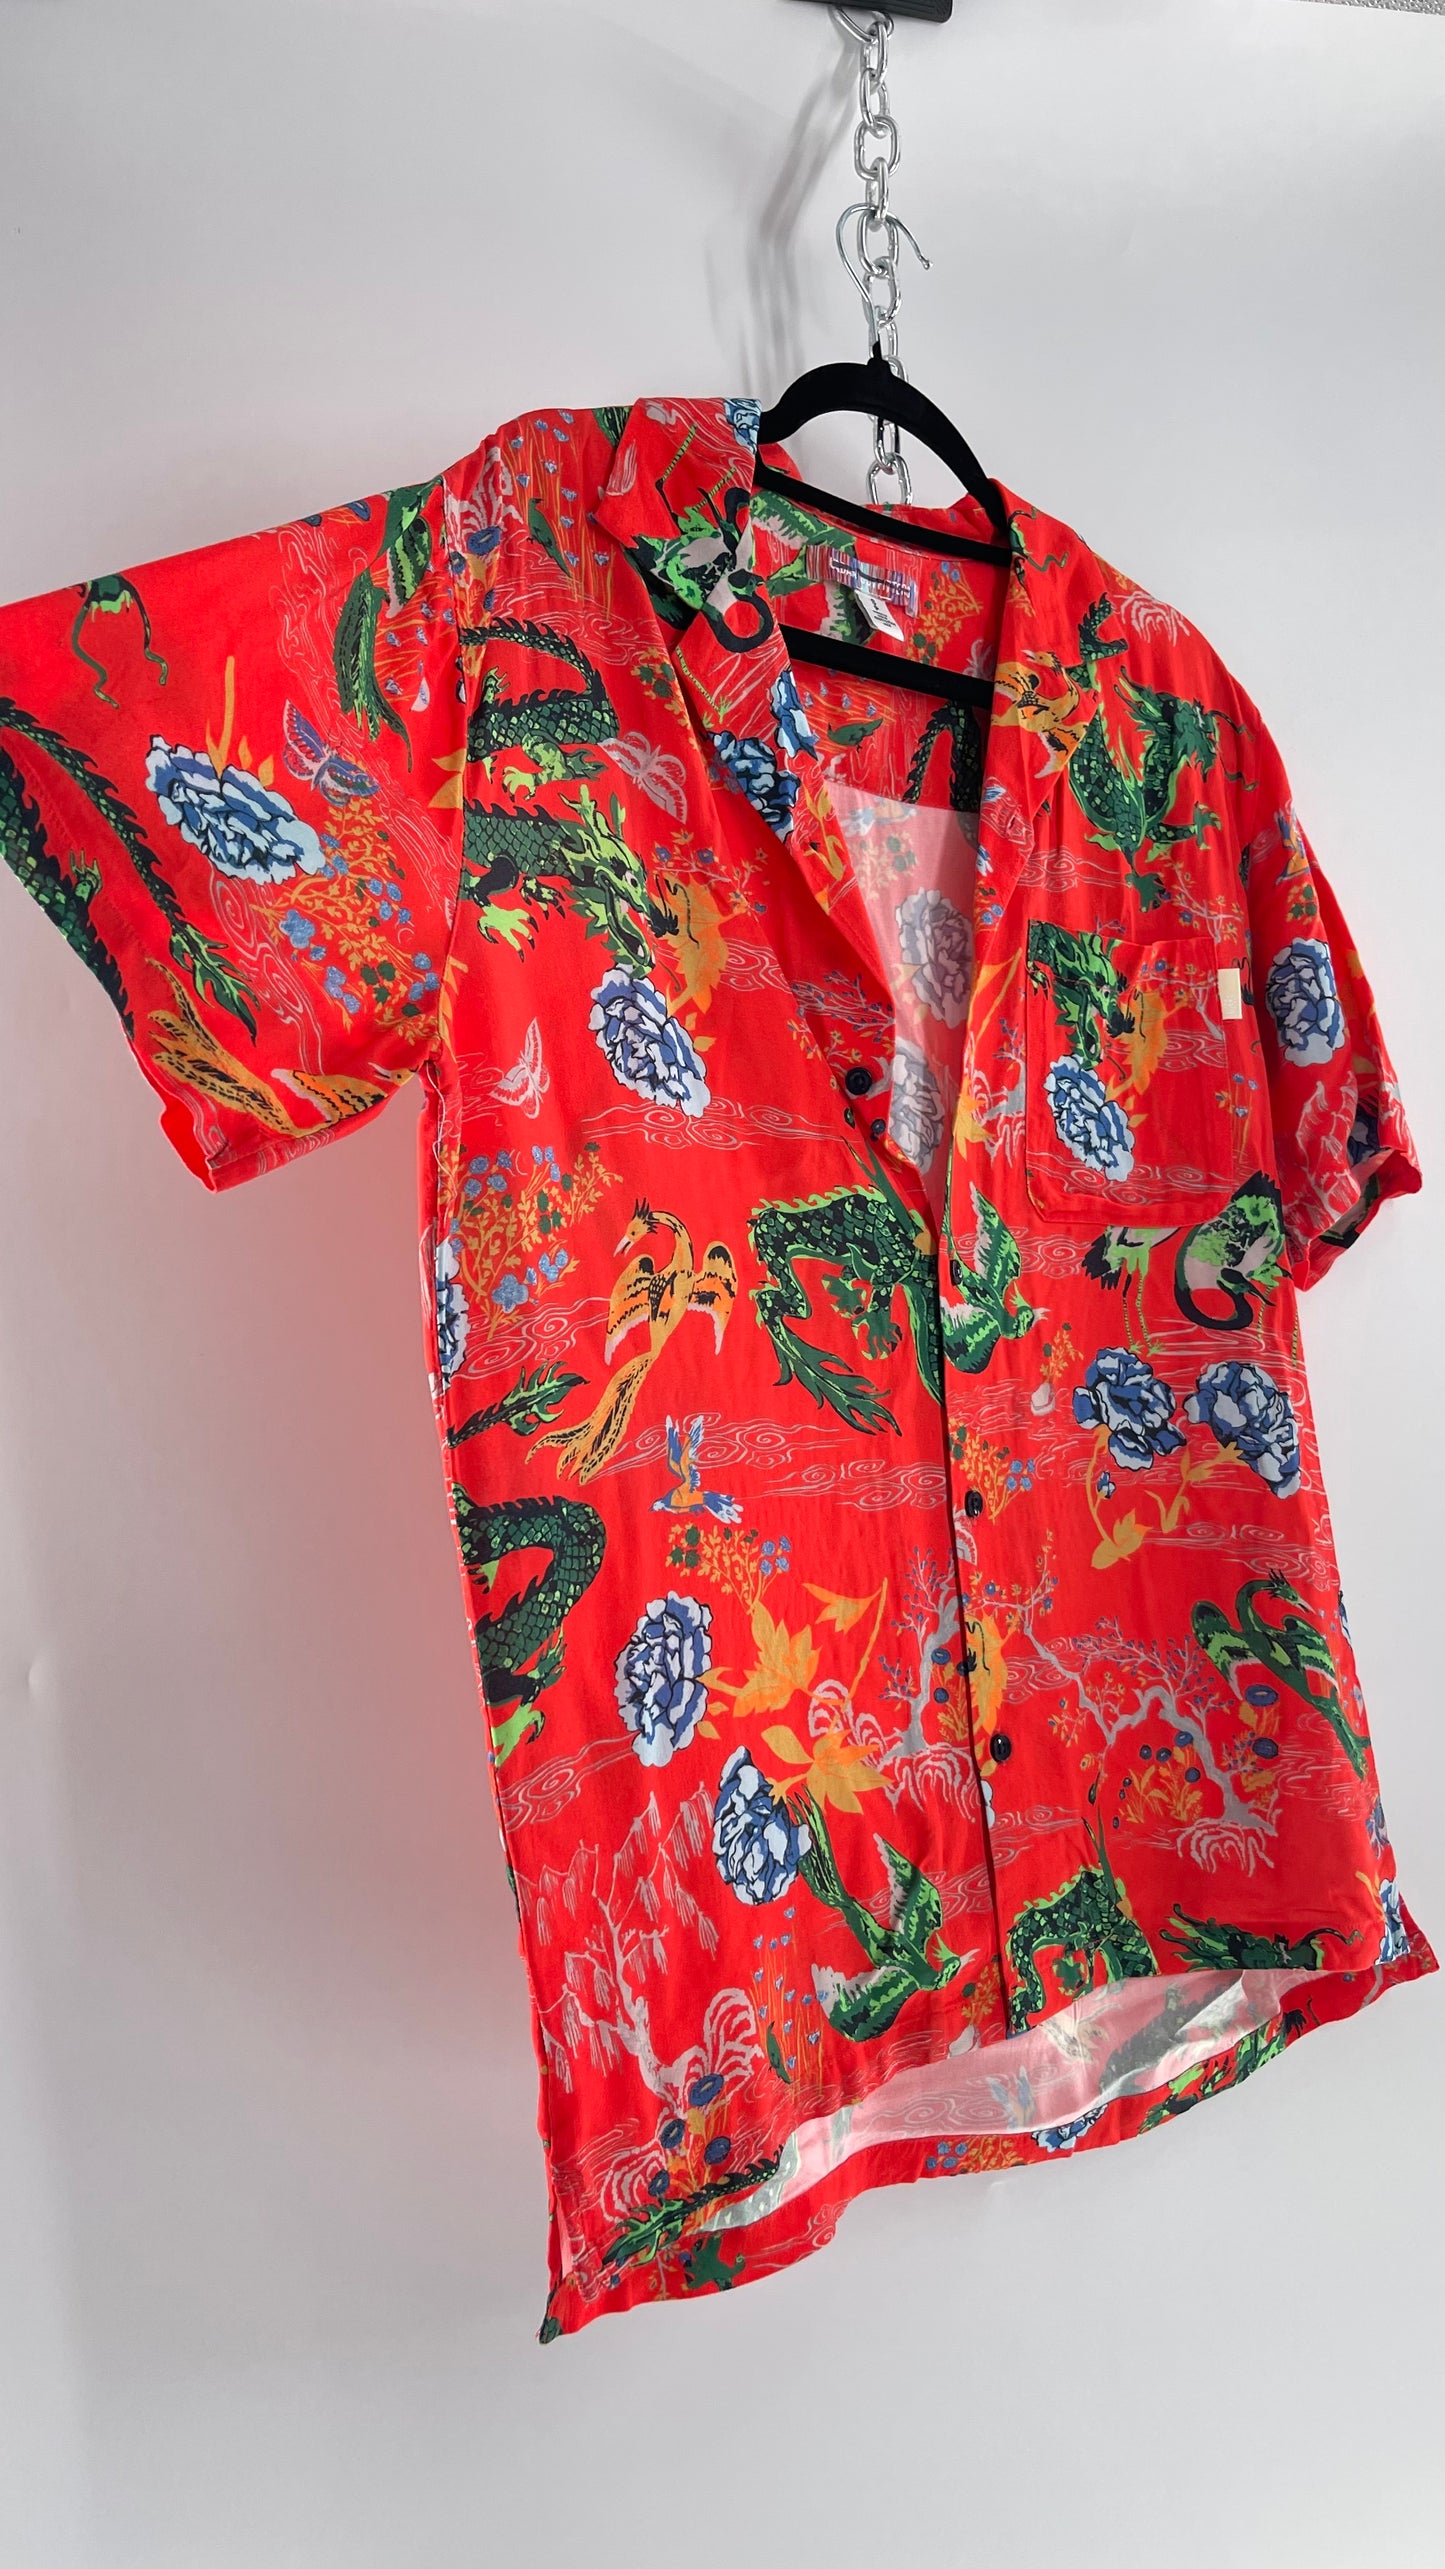 Urban Outfitters Red Dragon Motif Men’s Button Up (Small)